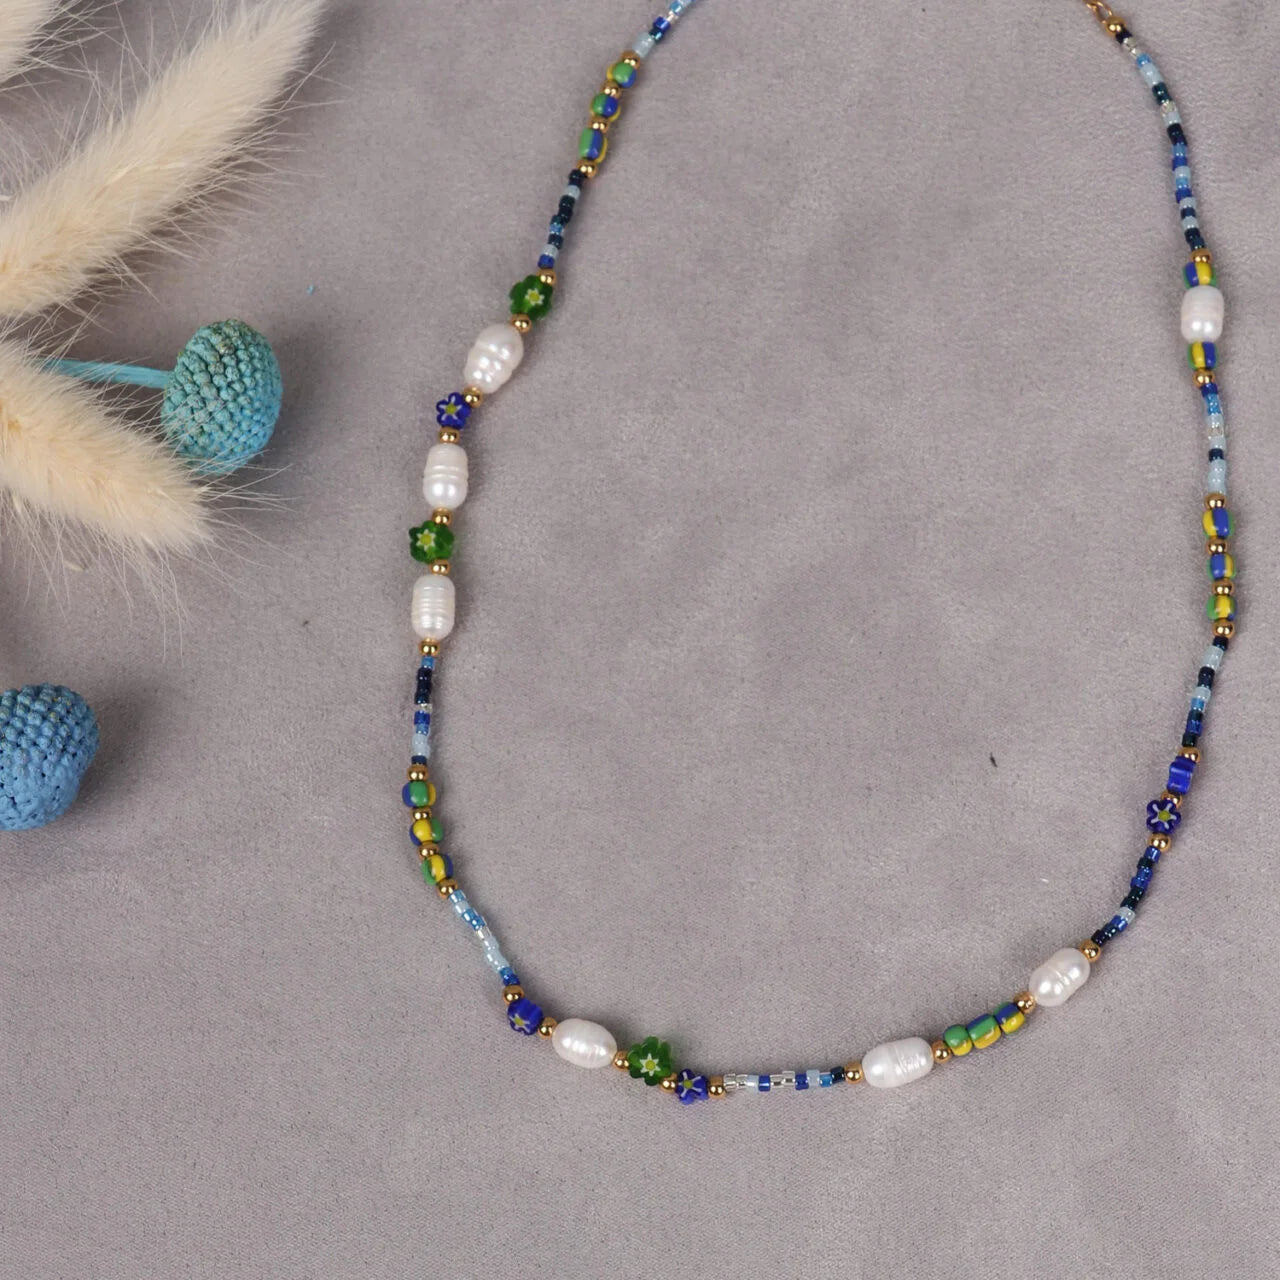 Fabulous Gifts Jewellery Necklace Japanese Seed & Camilla Beads by Weirs of Baggot Street